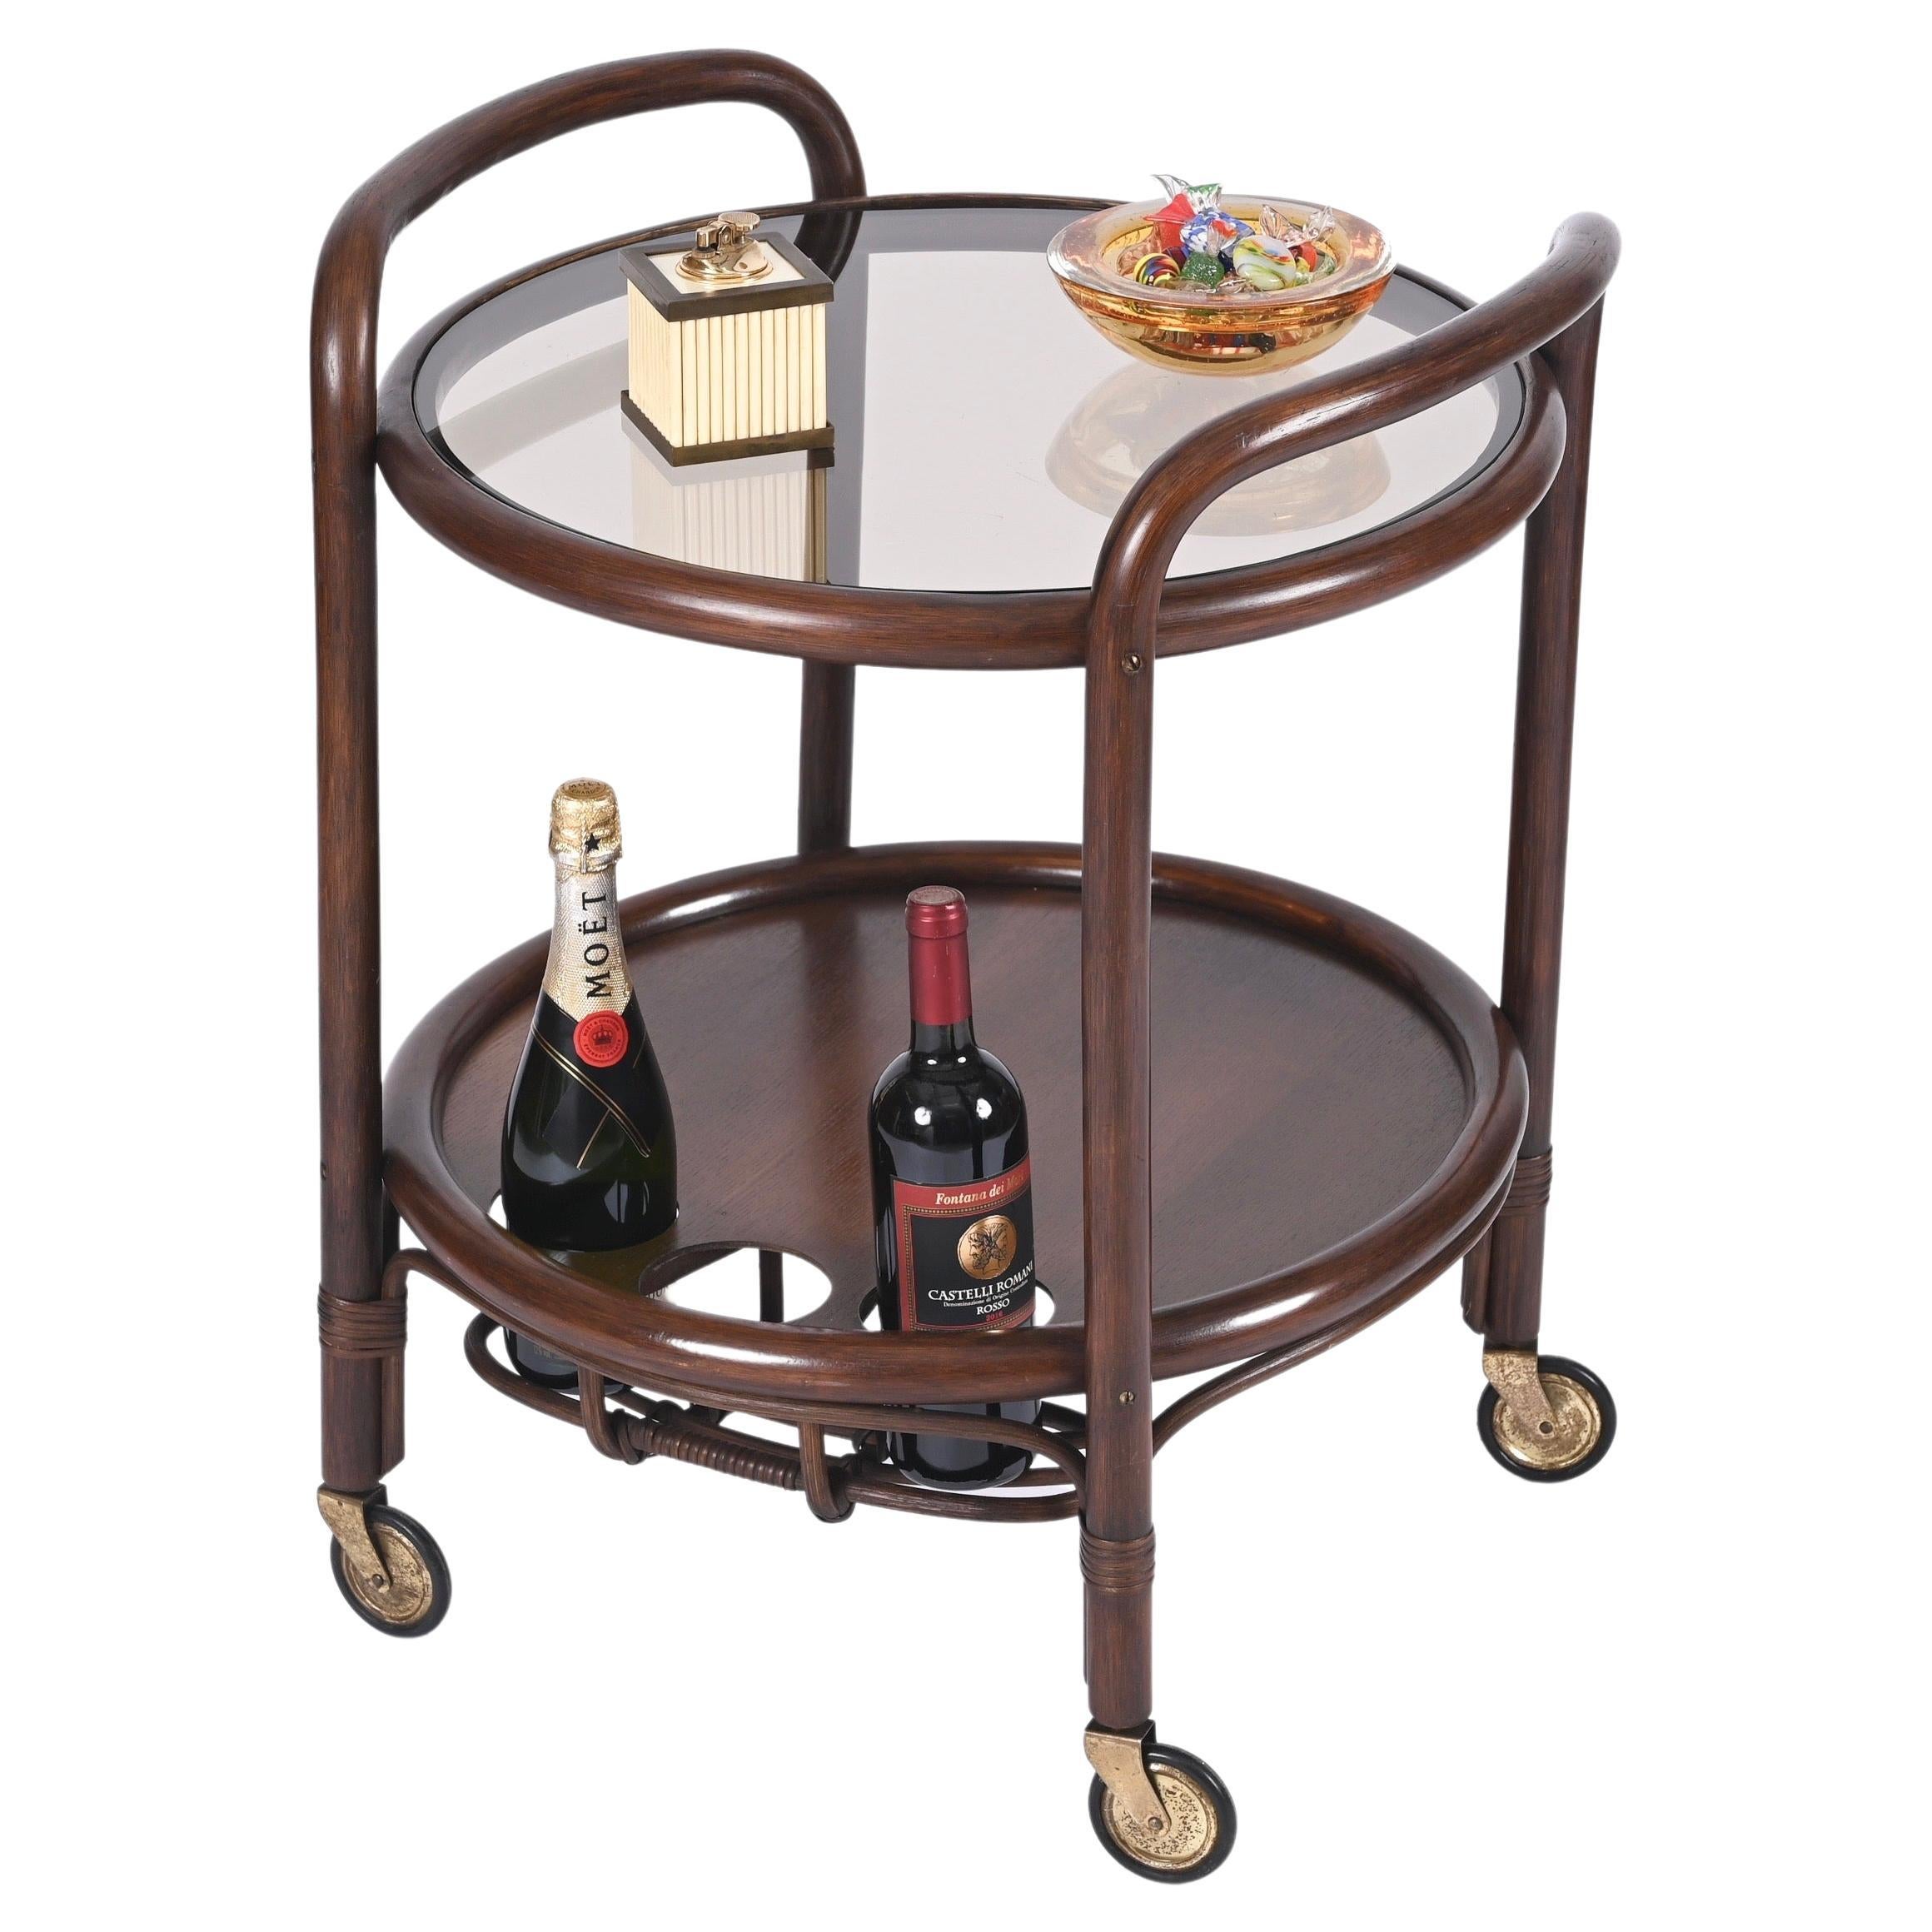 Gorgeous midcentury round serving cart in bamboo, rattan, walnut wood and smoked glass top with brass wheels. This stunning piece was produced in Italy in the 1970s.

The bar cart features a structure fully made in bamboo with two stunning tiers